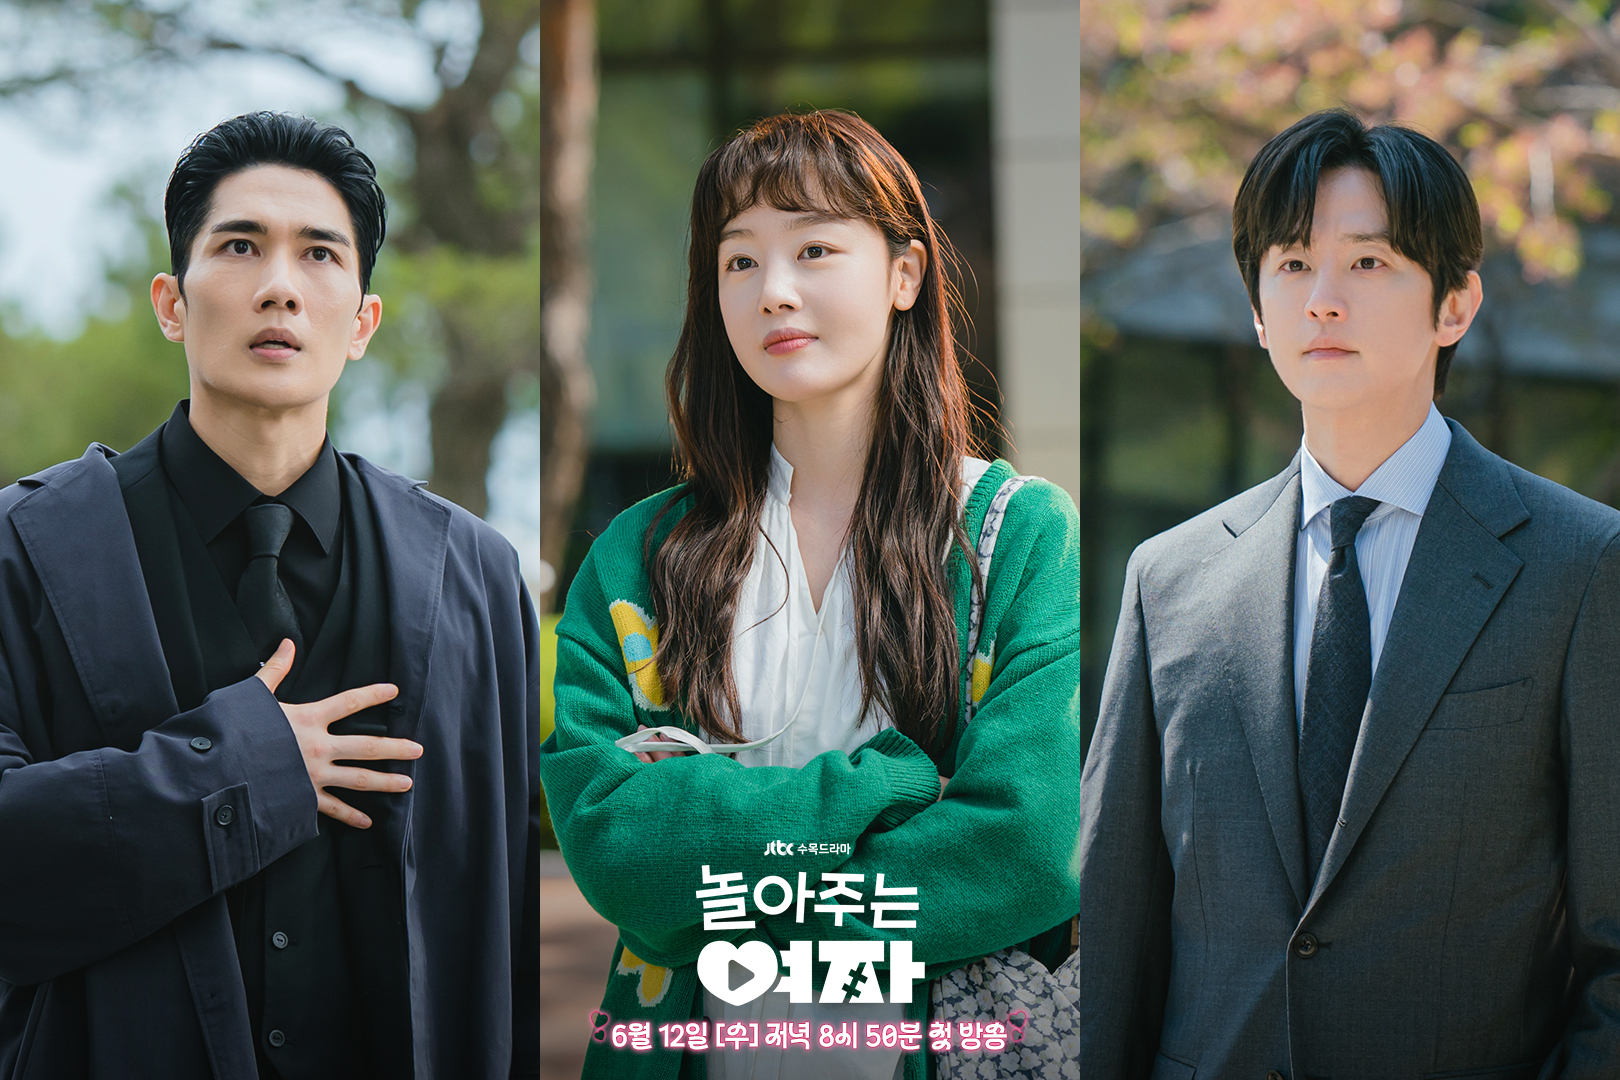 3 Points To Look Forward To In New Rom-Com “My Sweet Mobster”